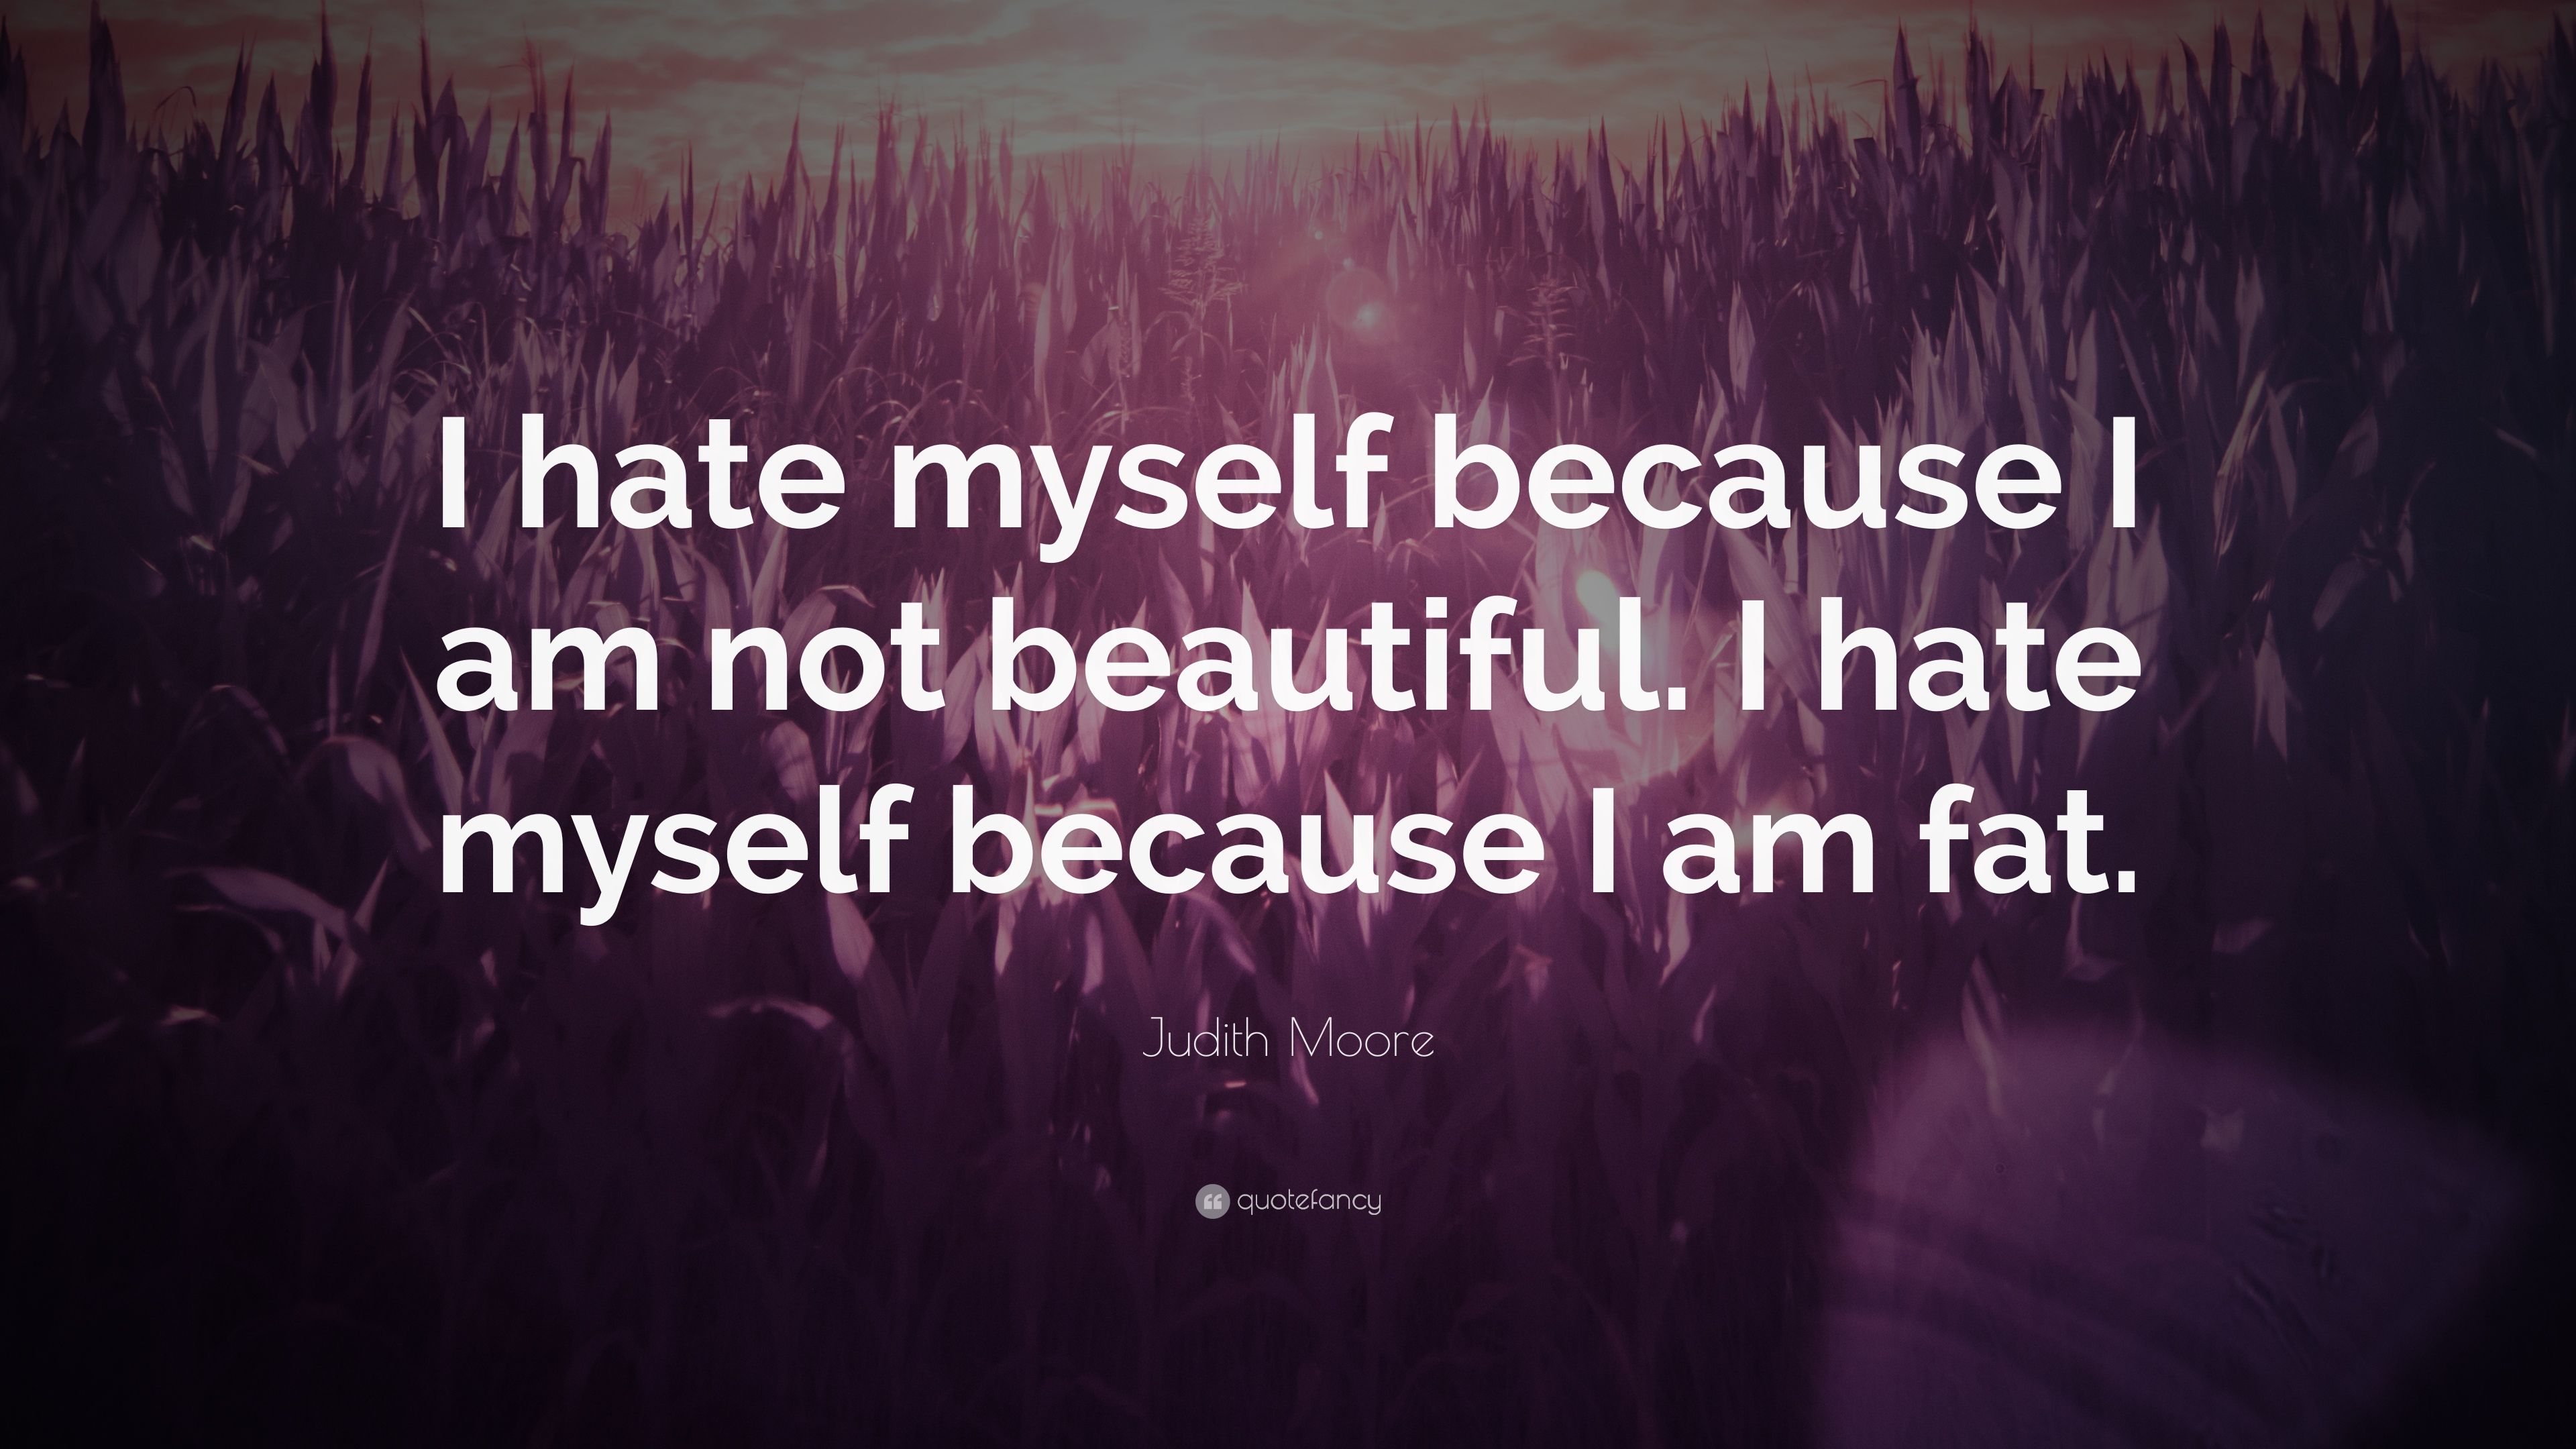 Judith Moore Quote: “I hate myself because I am not beautiful. I